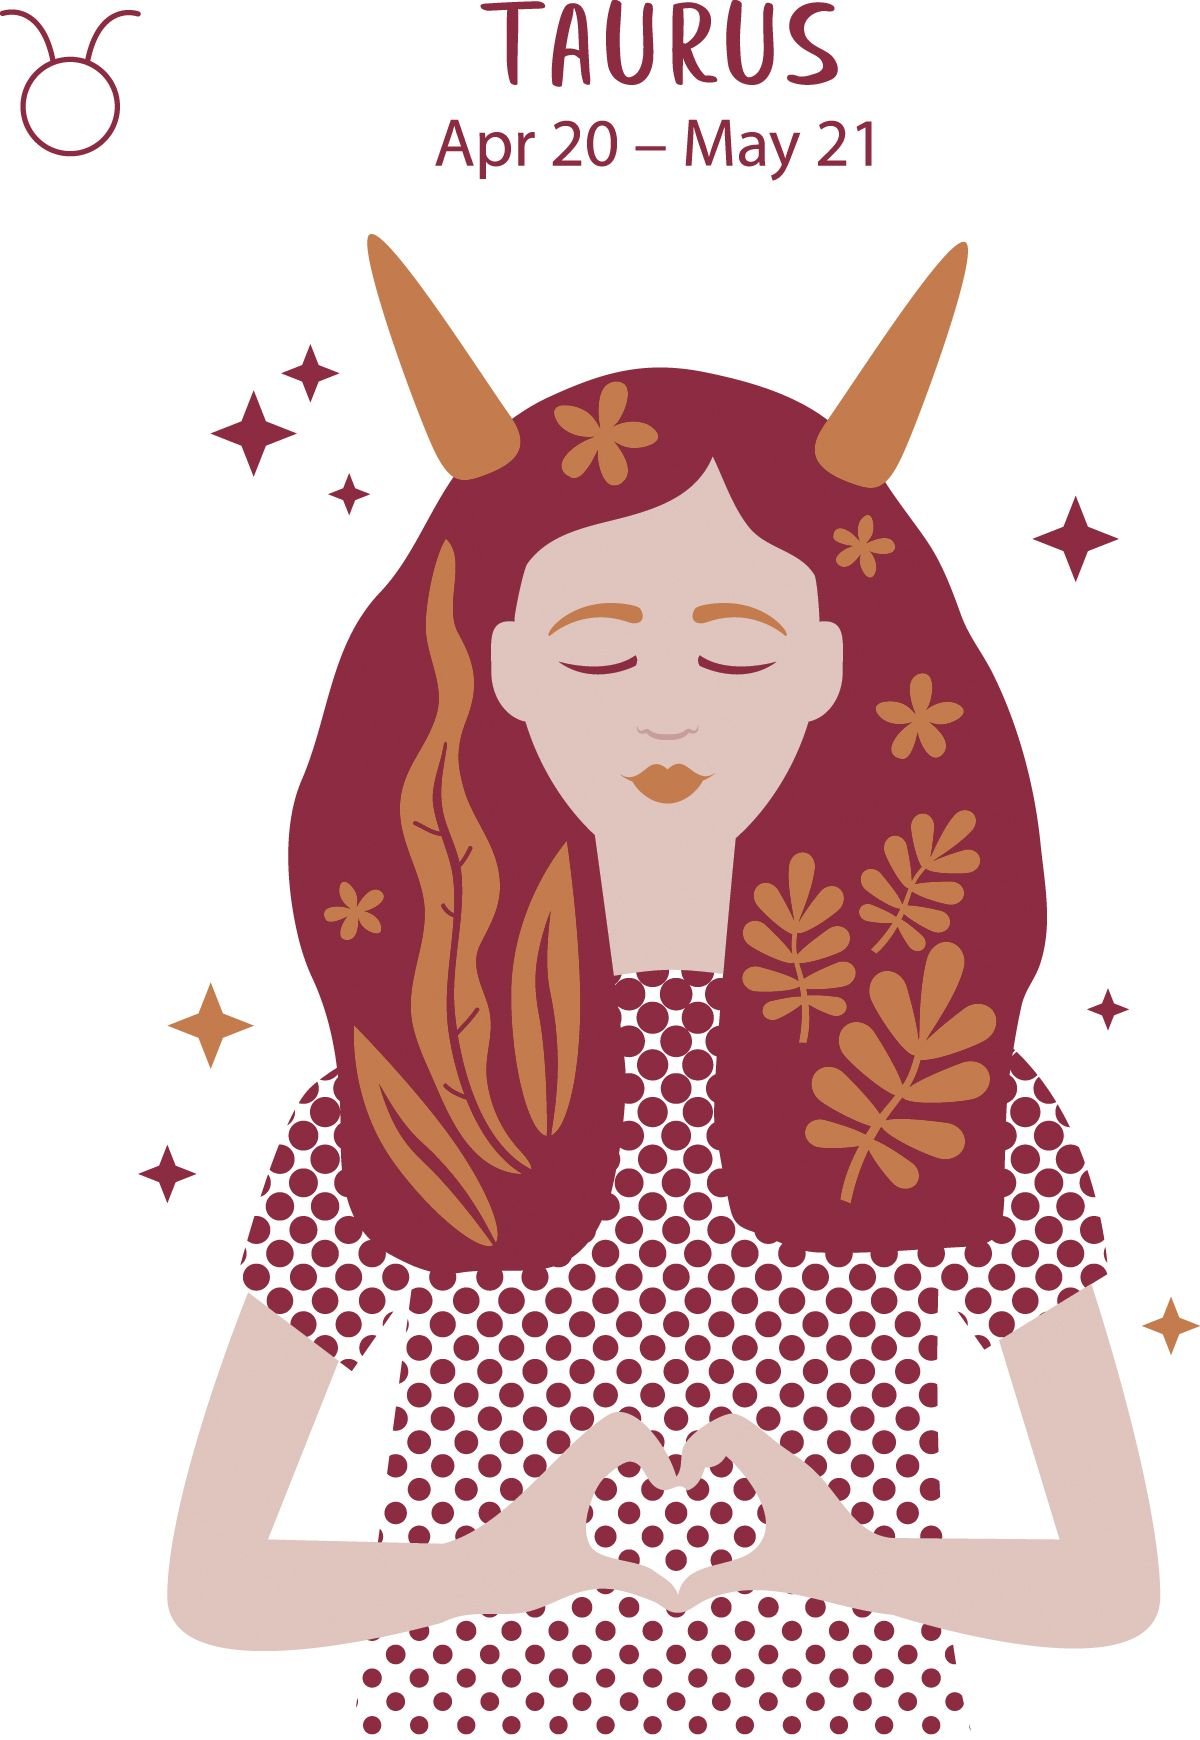 Taurus (April 20 - May 21) represented by a woman with spiked horns and foliage in her hair.